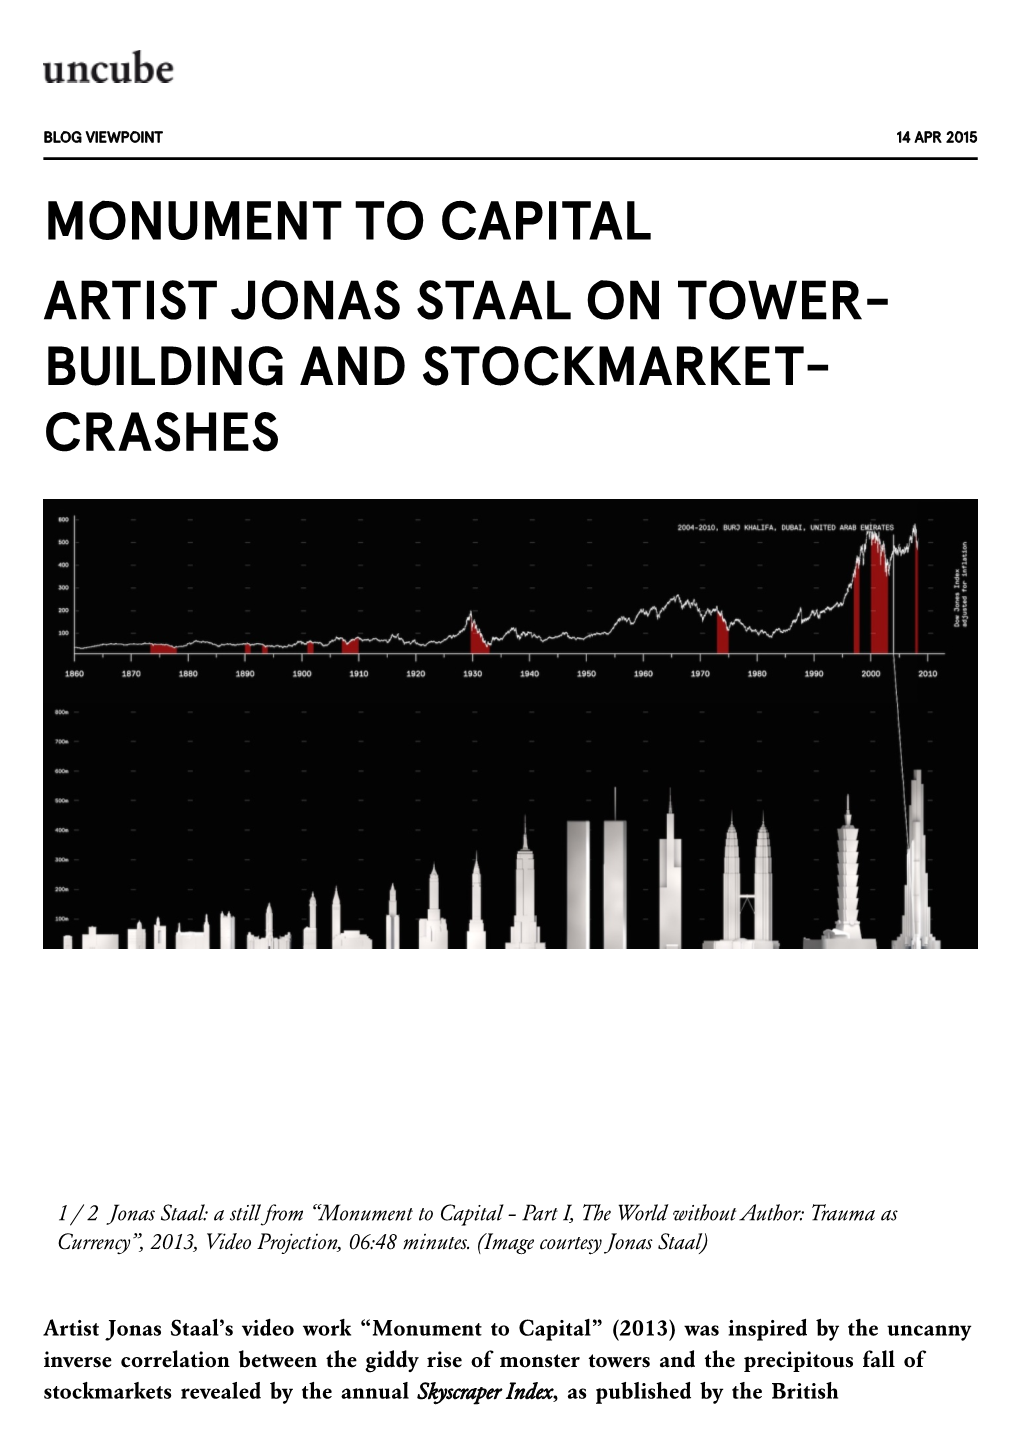 Monument to Capital Artist Jonas Staal on Tower- Building and Stockmarket- Crashes